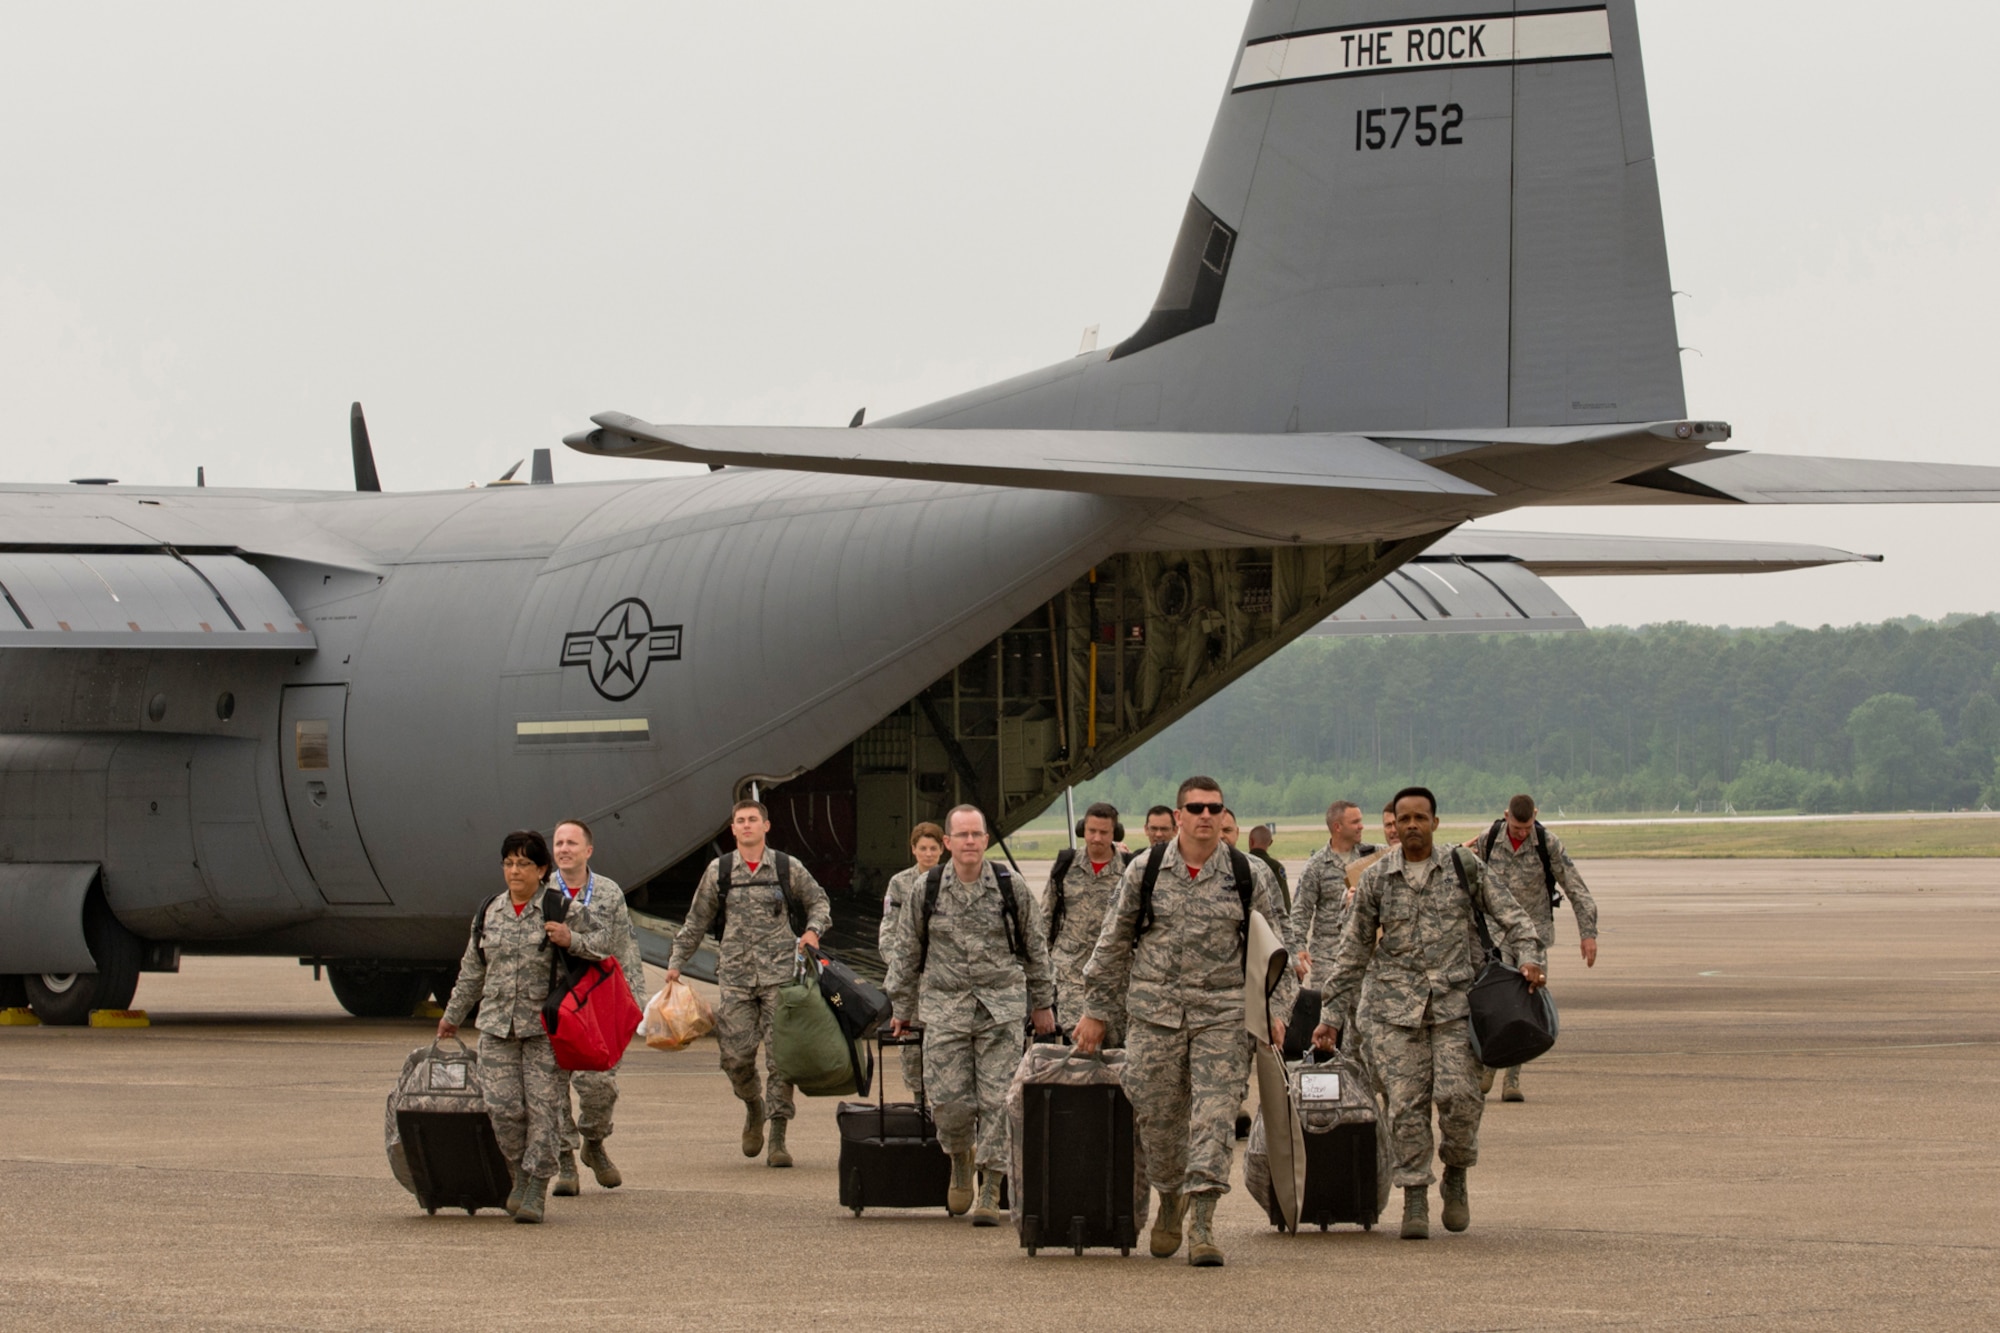 Members of the 96th Aerial Port Squadron deplane upon arrival at Little Rock Air Force, Ark., April 28, 2017. The Airman returned to Little Rock victorious, after winning the 2017 Air Force Reserve Command Port Dawg Challenge at Dobbins Air Reserve Base, Ga. The three day competition pitted 23 teams against each other in 12 different events, which were designed to foster communication, leadership, professionalism and camaraderie between the participants. (U.S. Air Force photo by Master Sgt. Jeff Walston/Released)